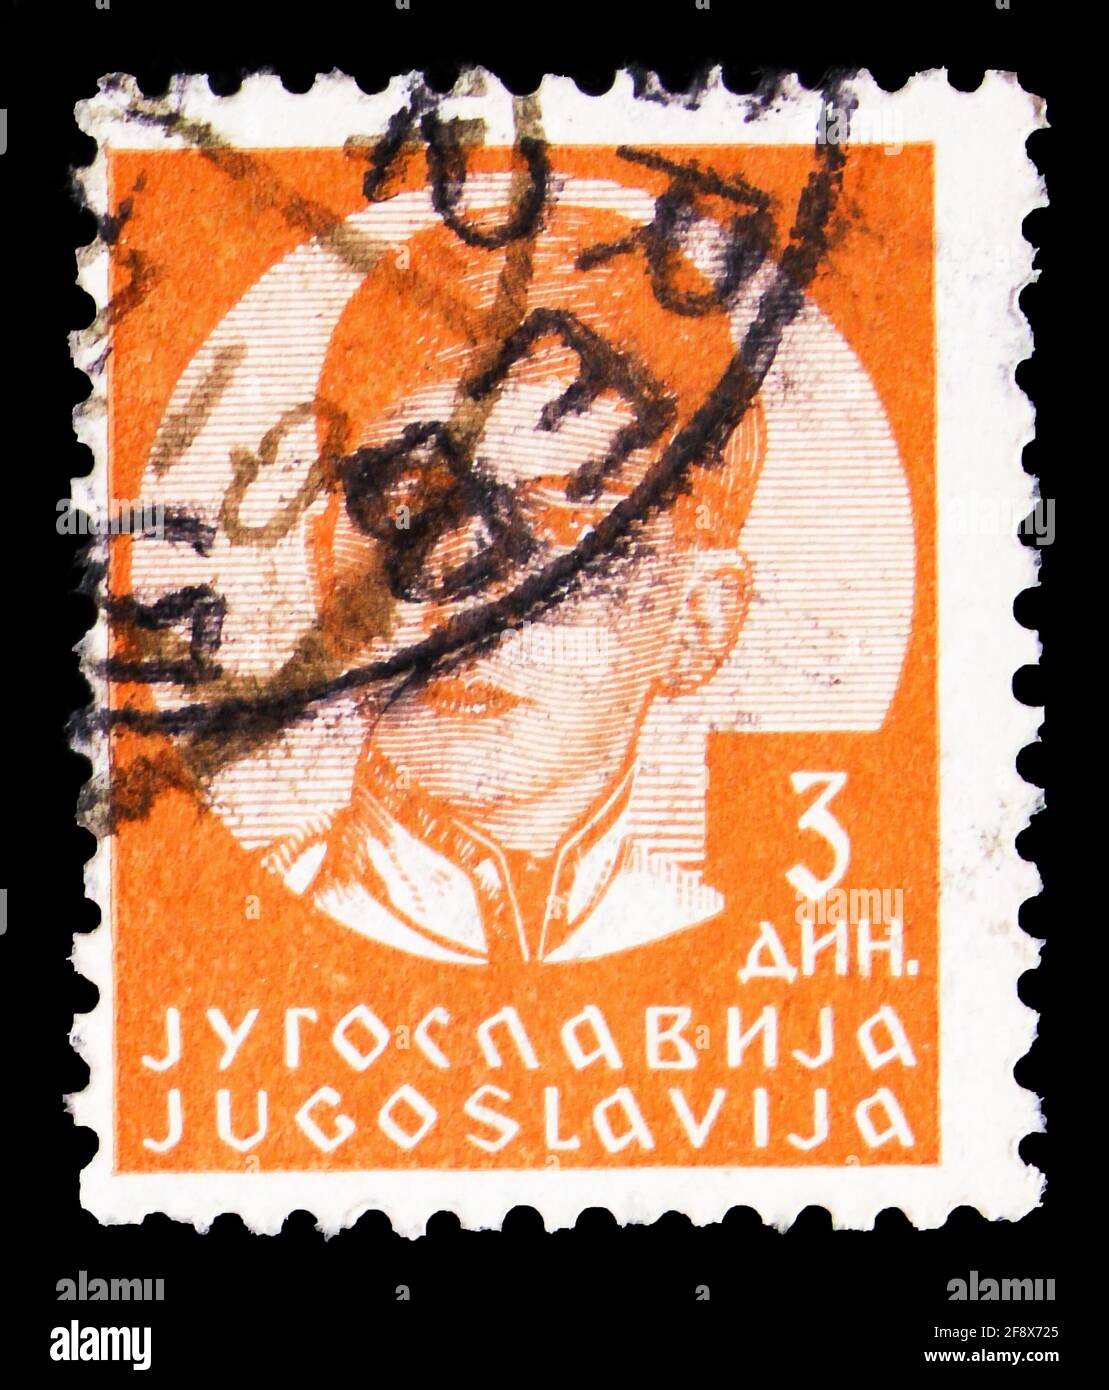 MOSCOW, RUSSIA - OCTOBER 1, 2019: Postage stamp printed in Yugoslavia shows King Peter II (1923-1970), serie, 3 din. - Yugoslav dinar, circa 1935 Stock Photo